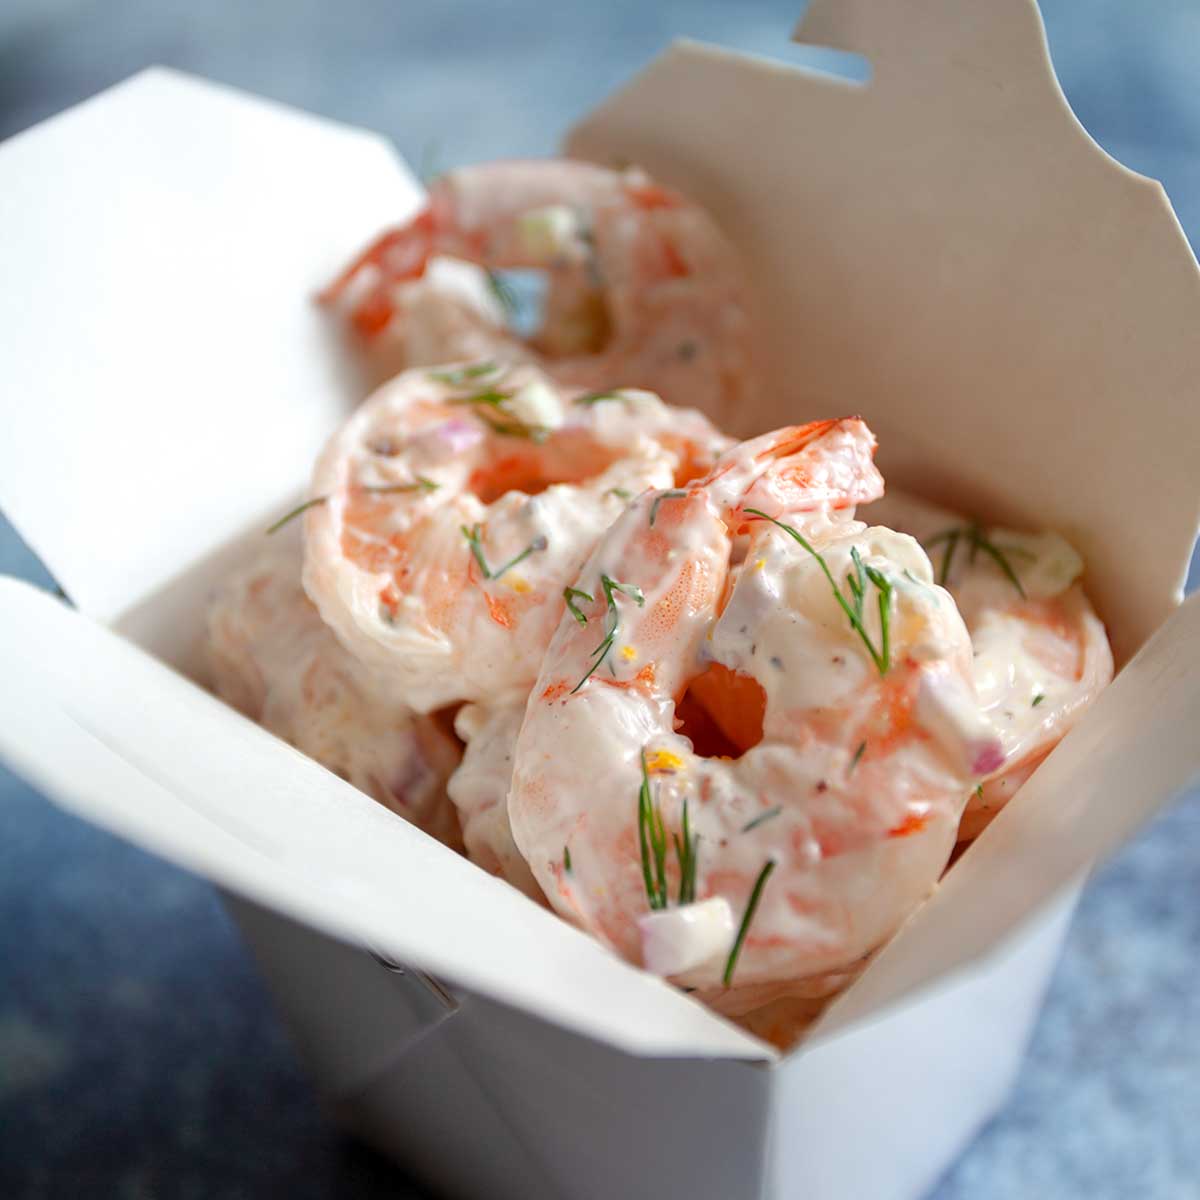 Shrimp salad garnished with dill in a cardboard takeout container.